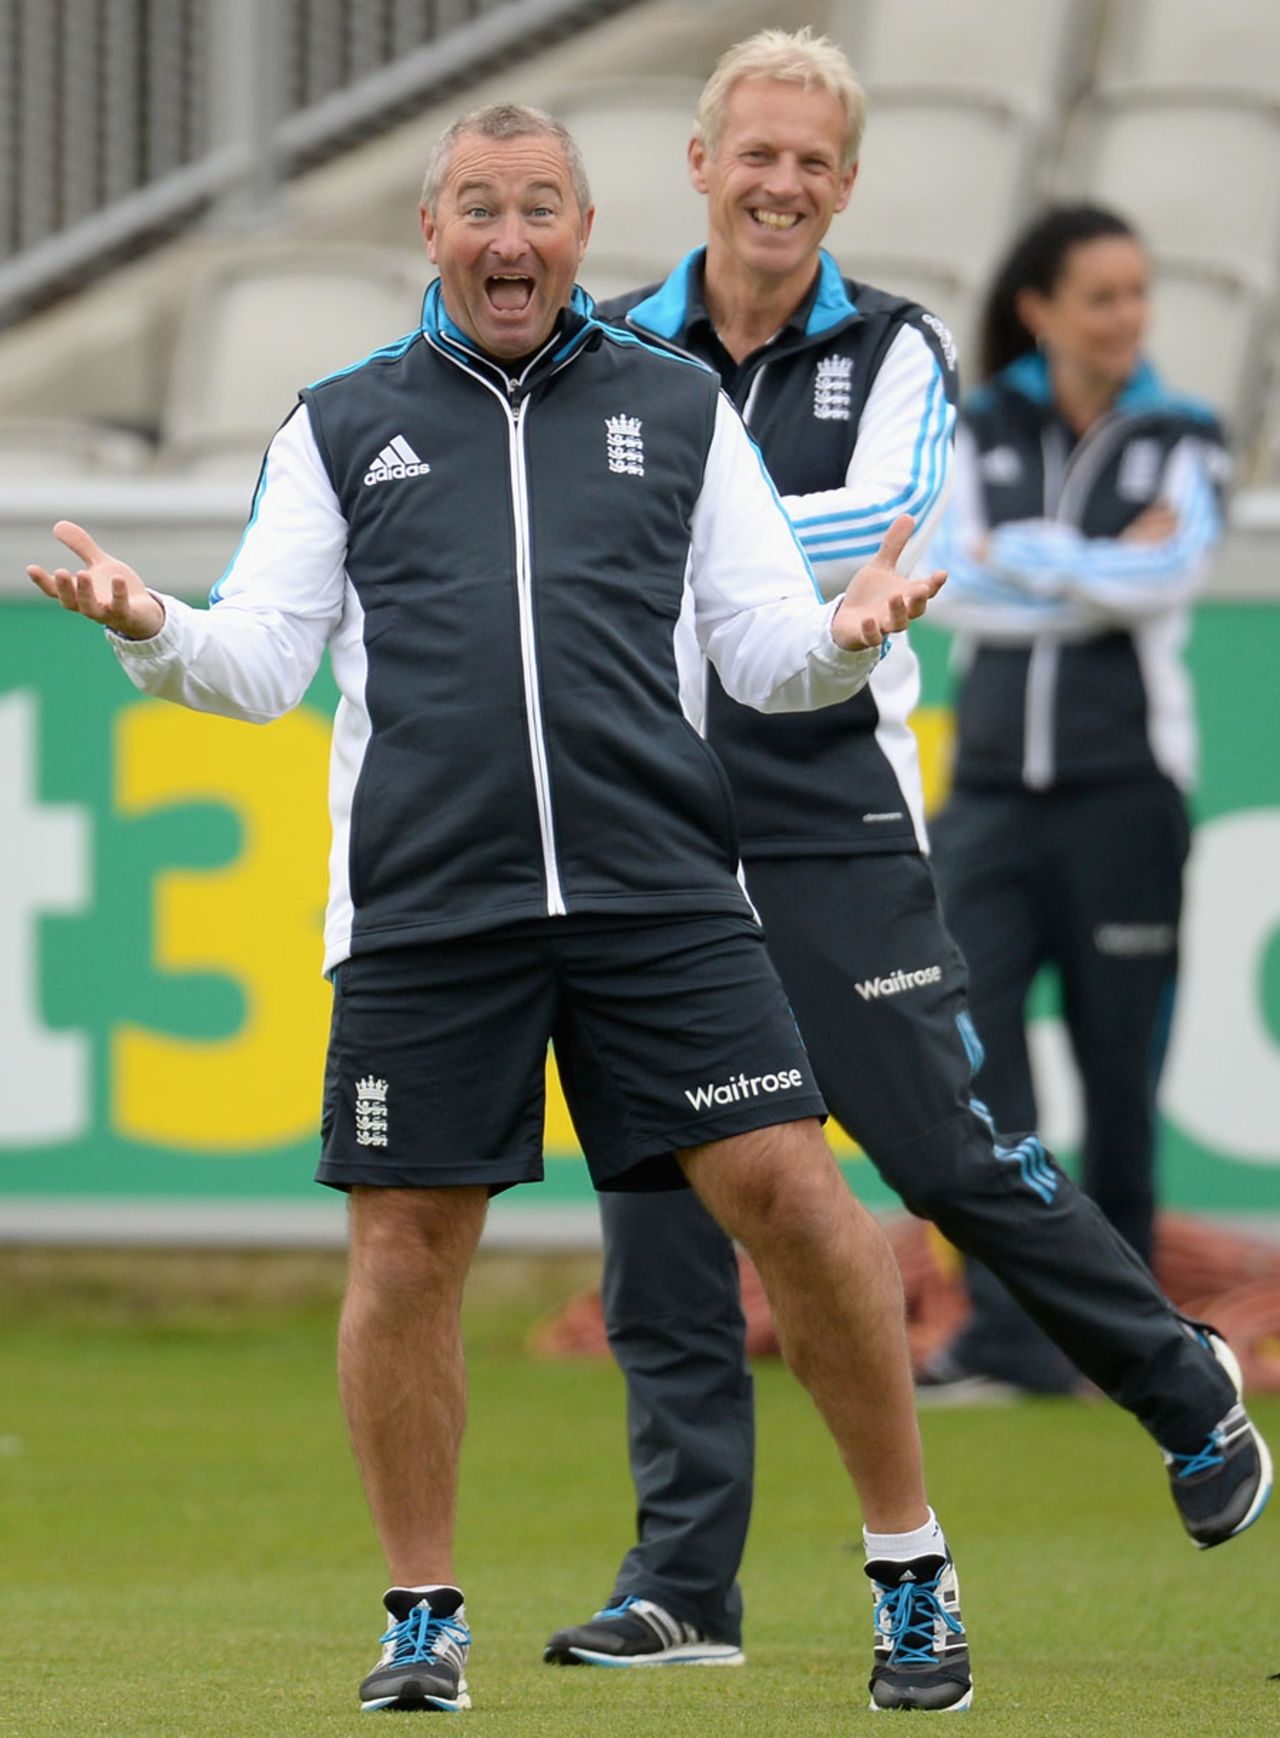 Are you having a laugh? Paul Farbrace and Peter Moores enjoy a lighter moment, Old Trafford, May 27, 2014